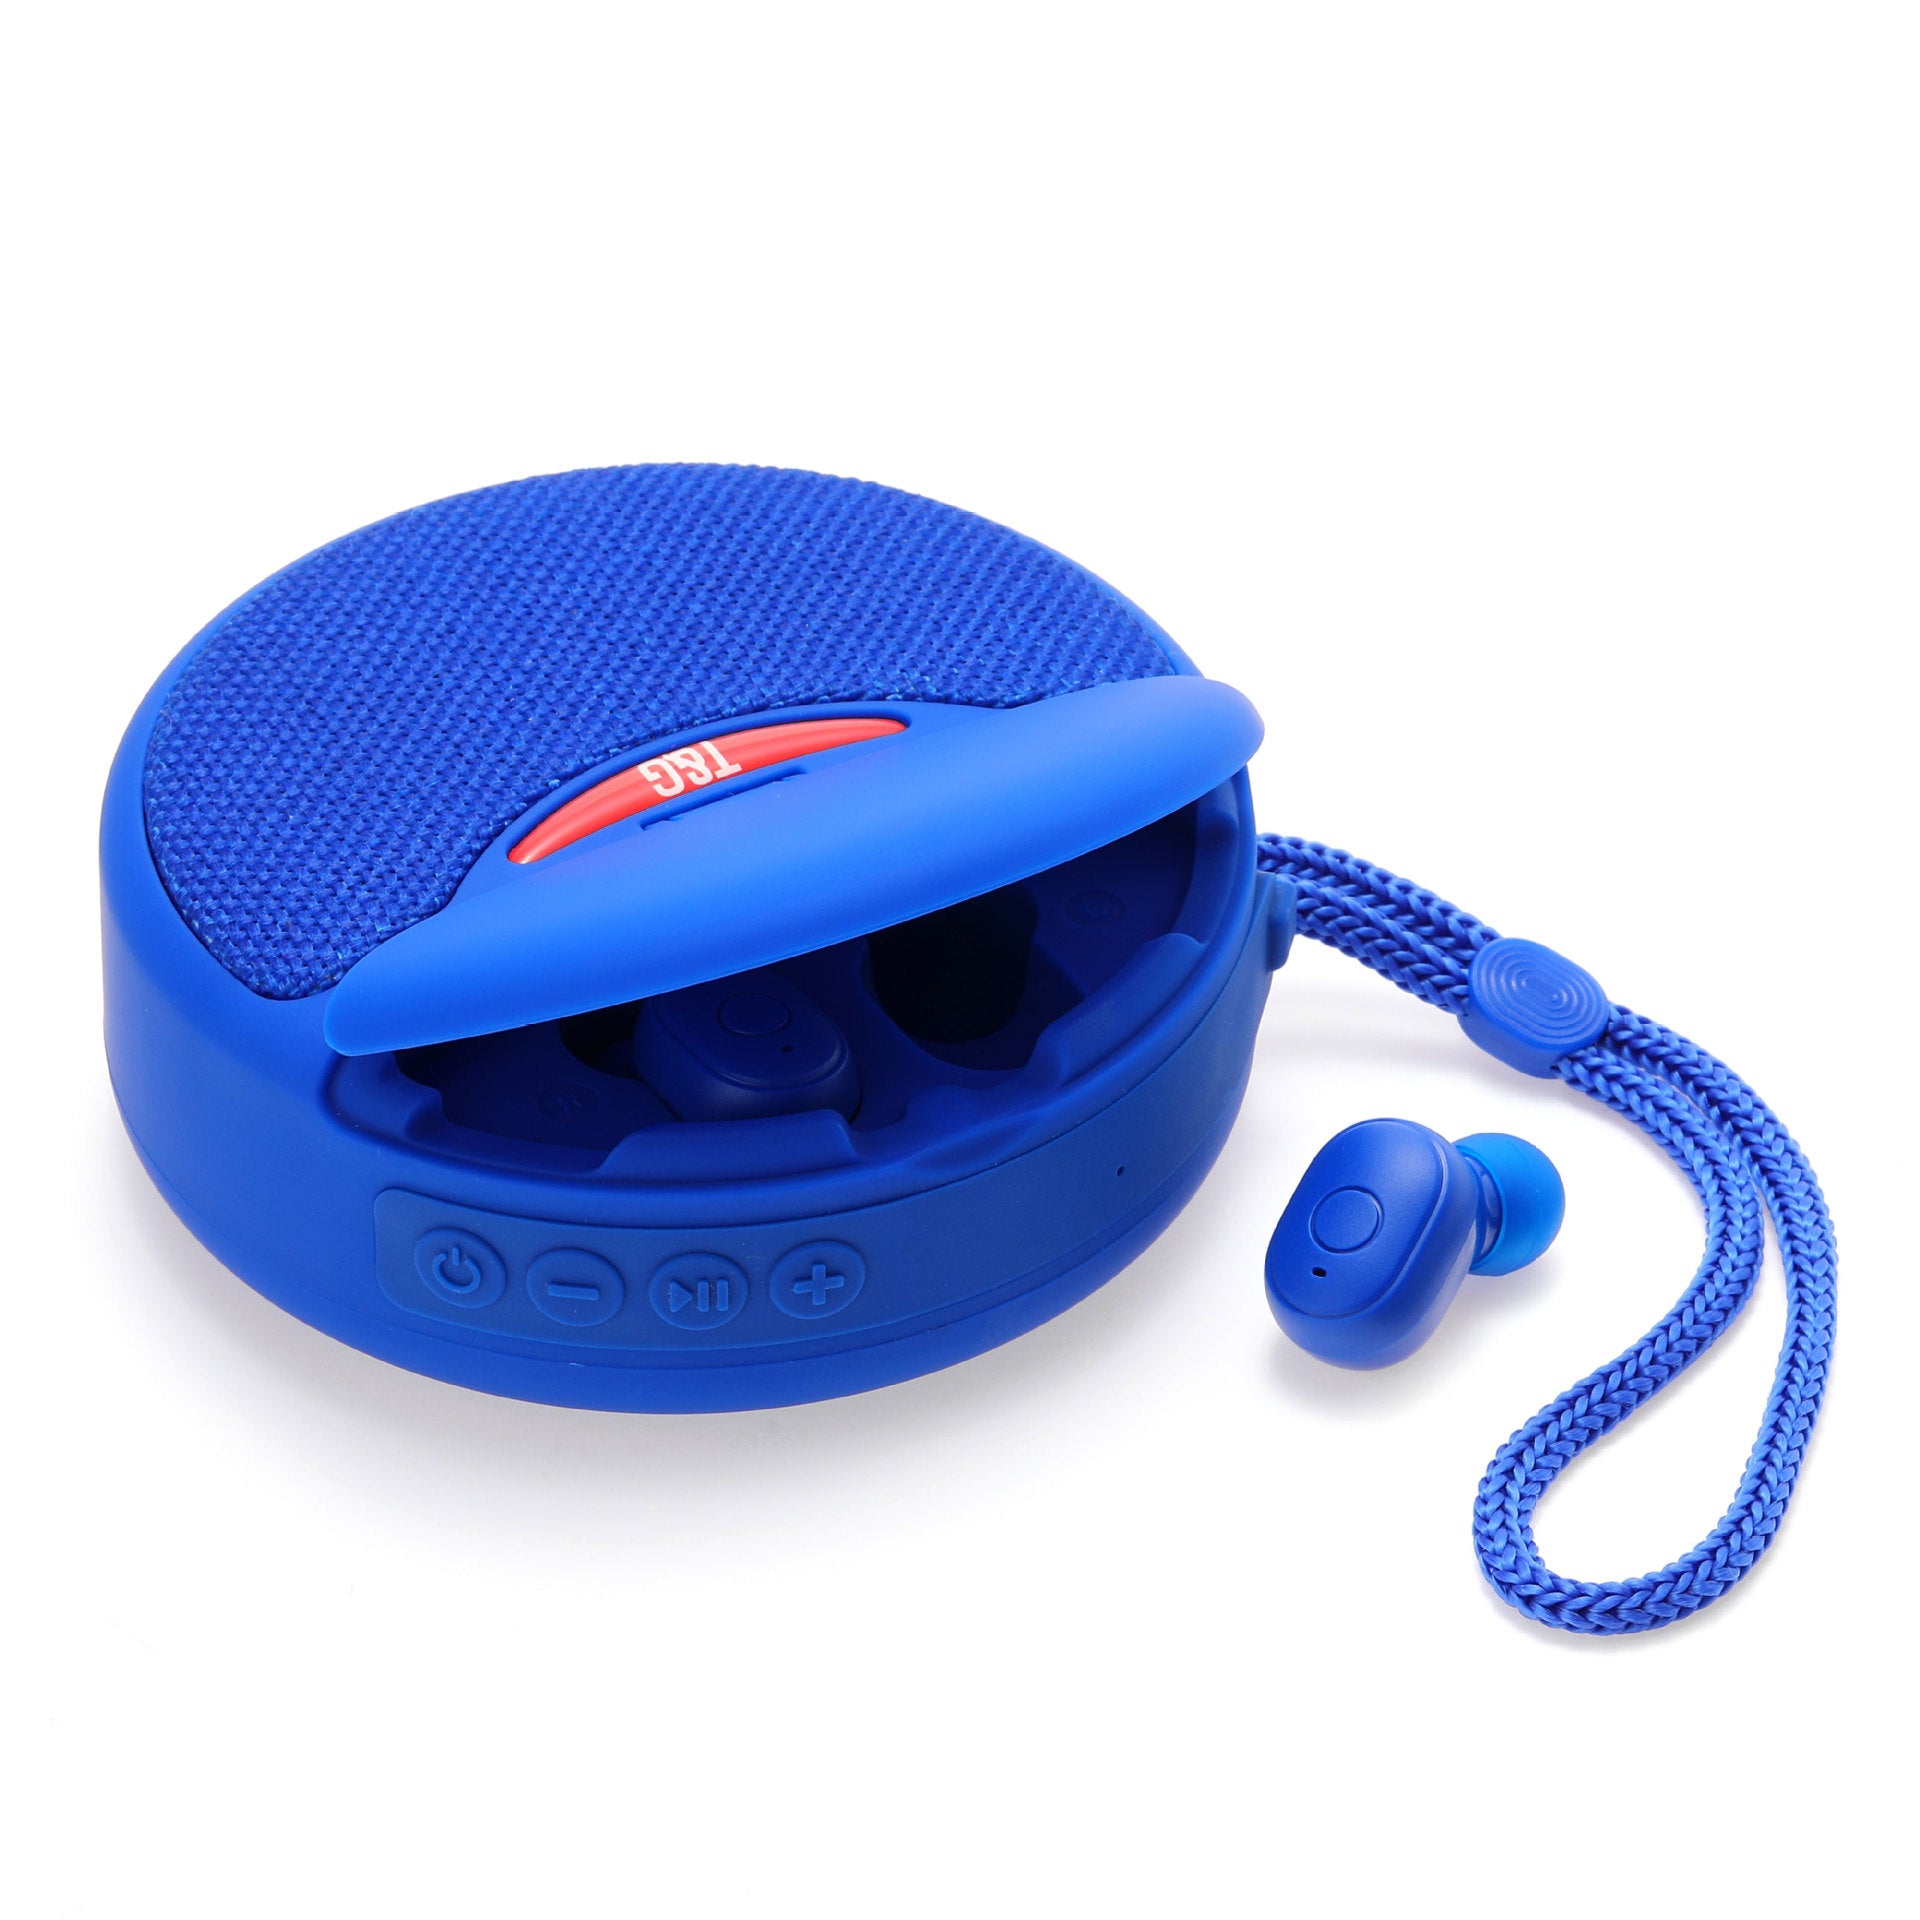 Outdoor Portable Headset Bluetooth Speaker Integrated Wireless 3D Stereo Subwoofer Music Speaker Support TF Card FM Radio - Plushlegacy